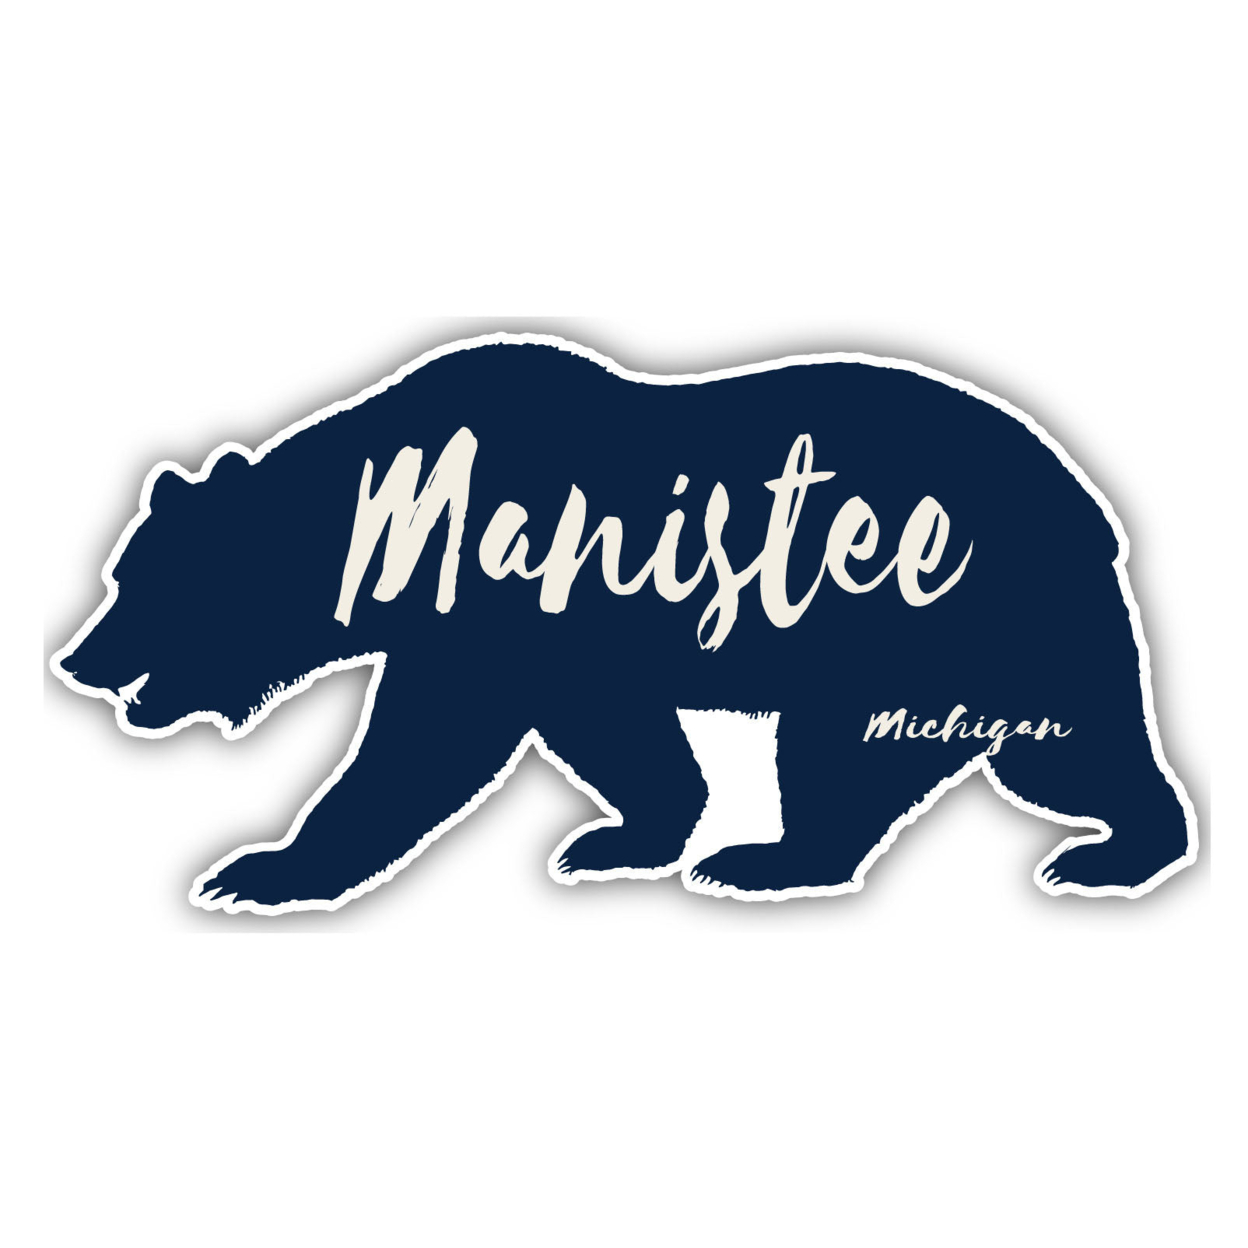 Manistee Michigan Souvenir Decorative Stickers (Choose Theme And Size) - 4-Inch, Bear